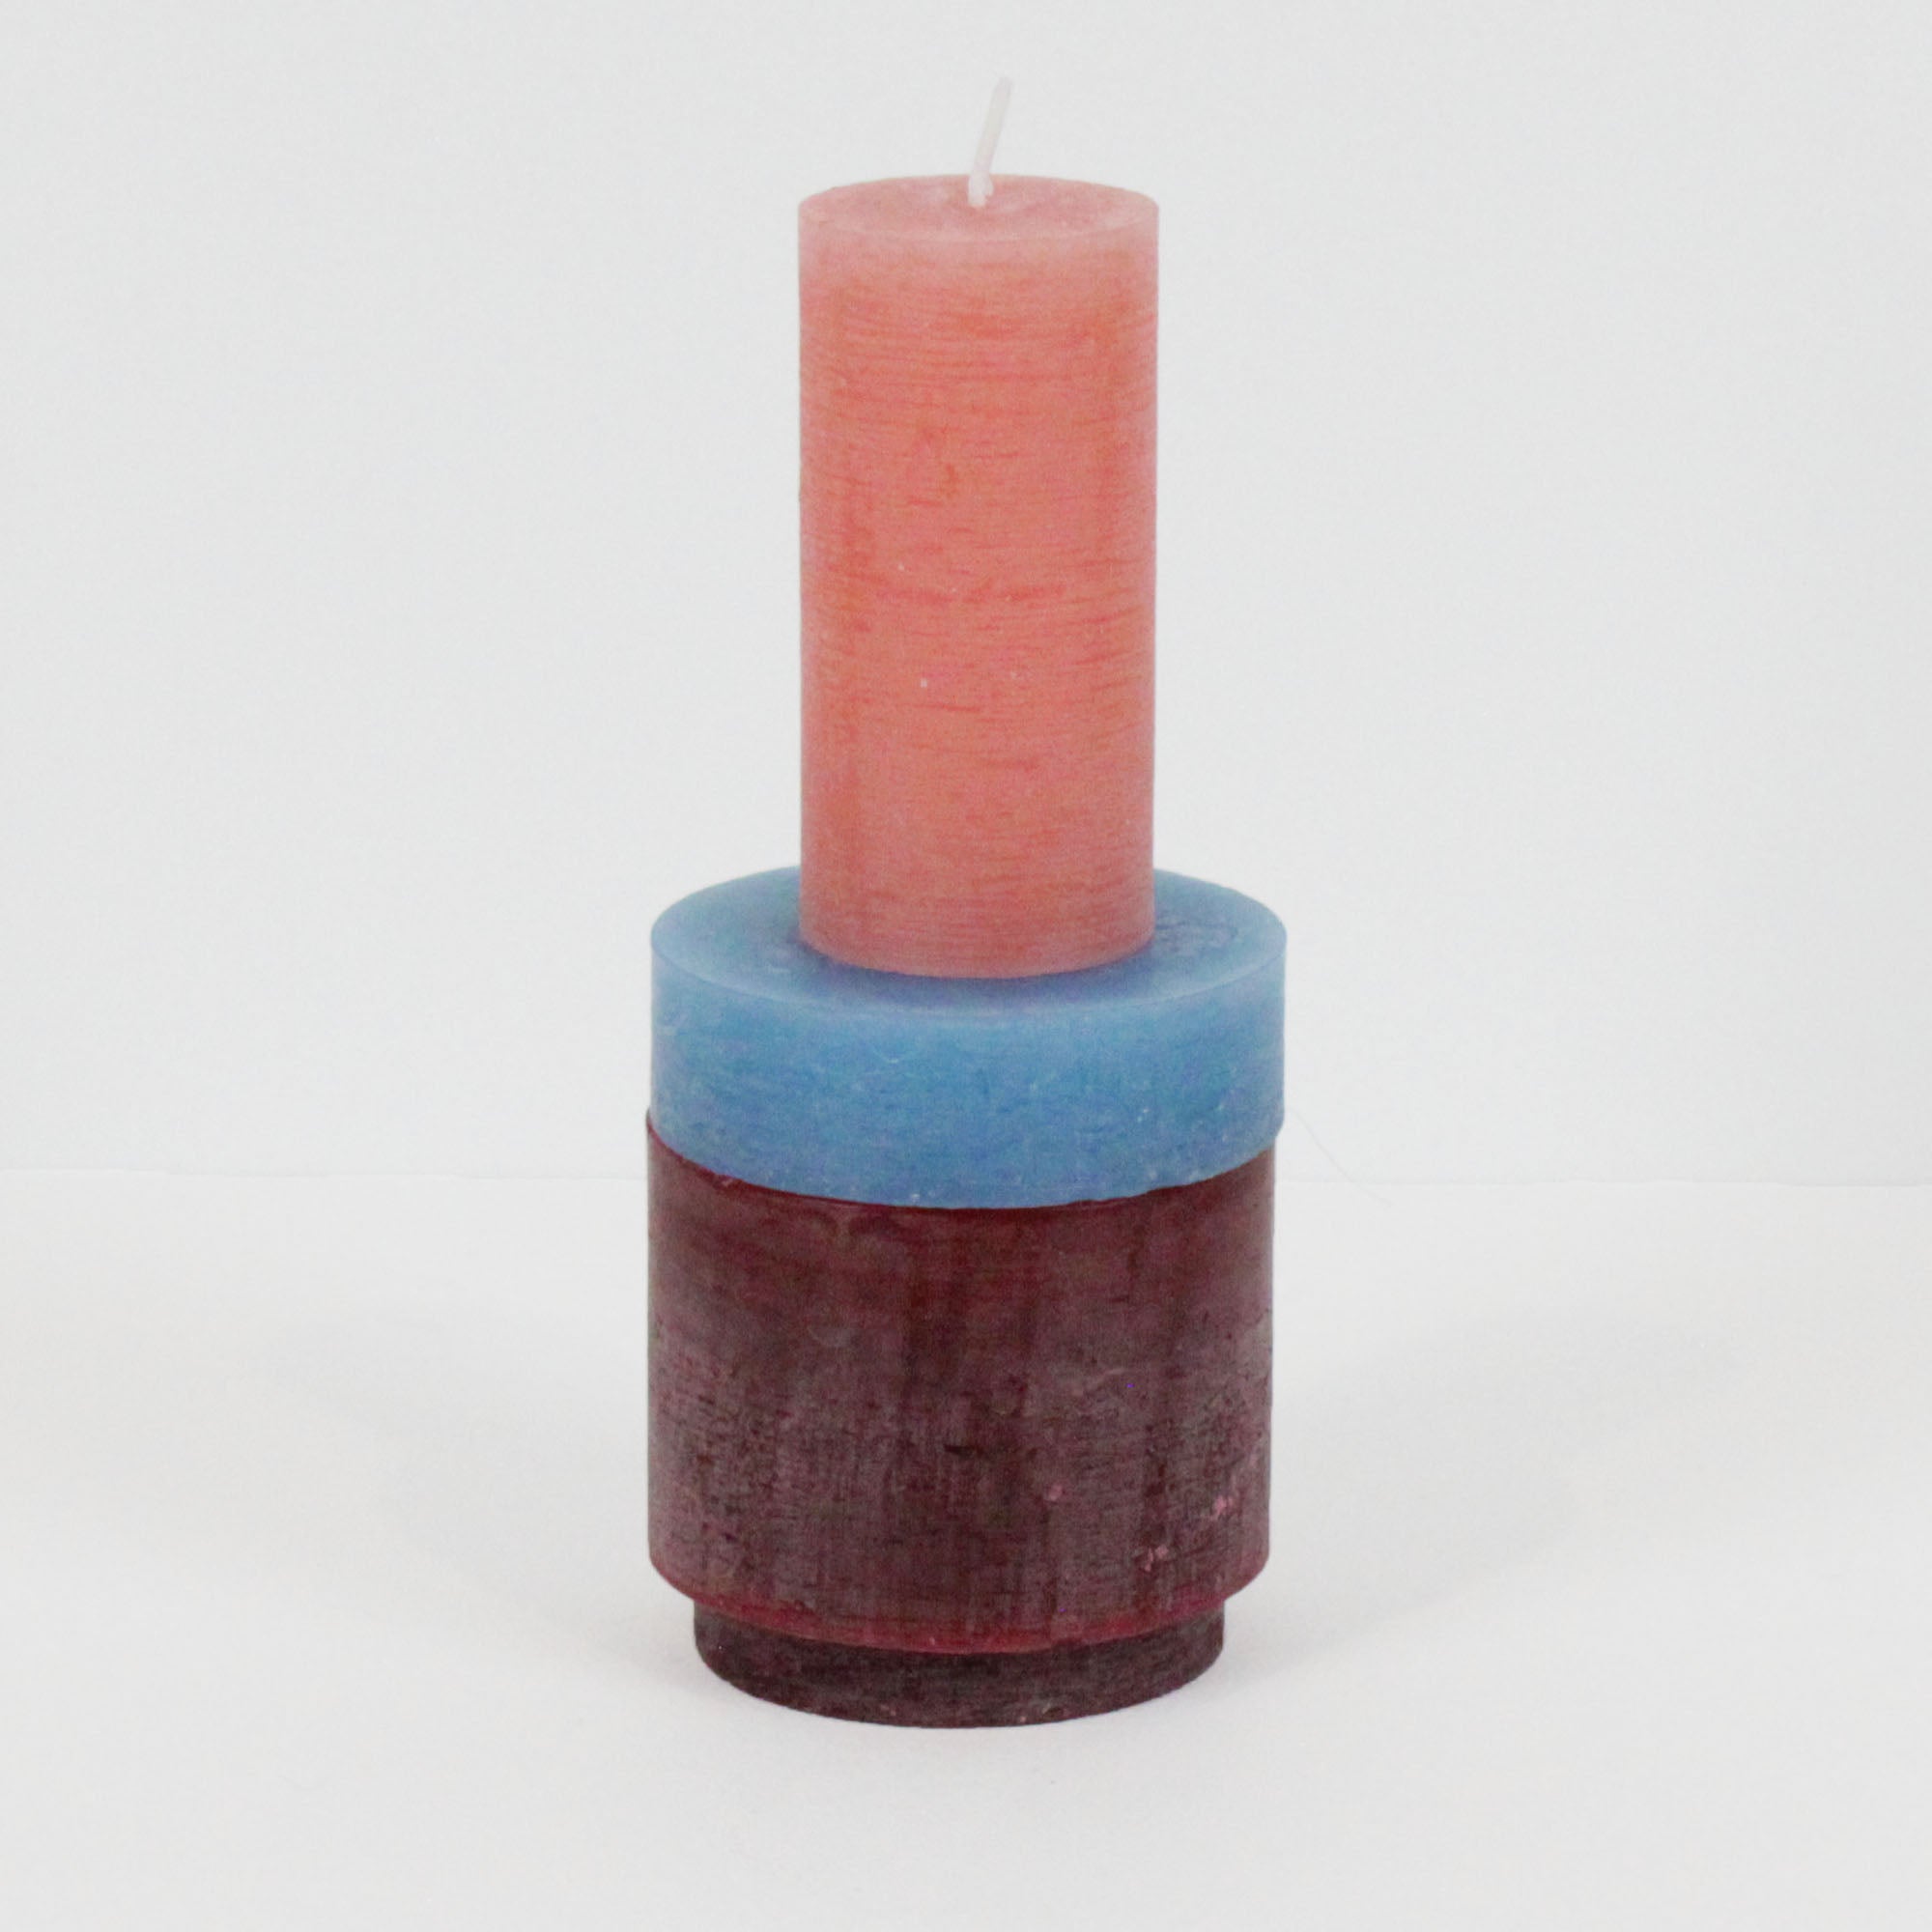 Candle Stack 02 (Multi)